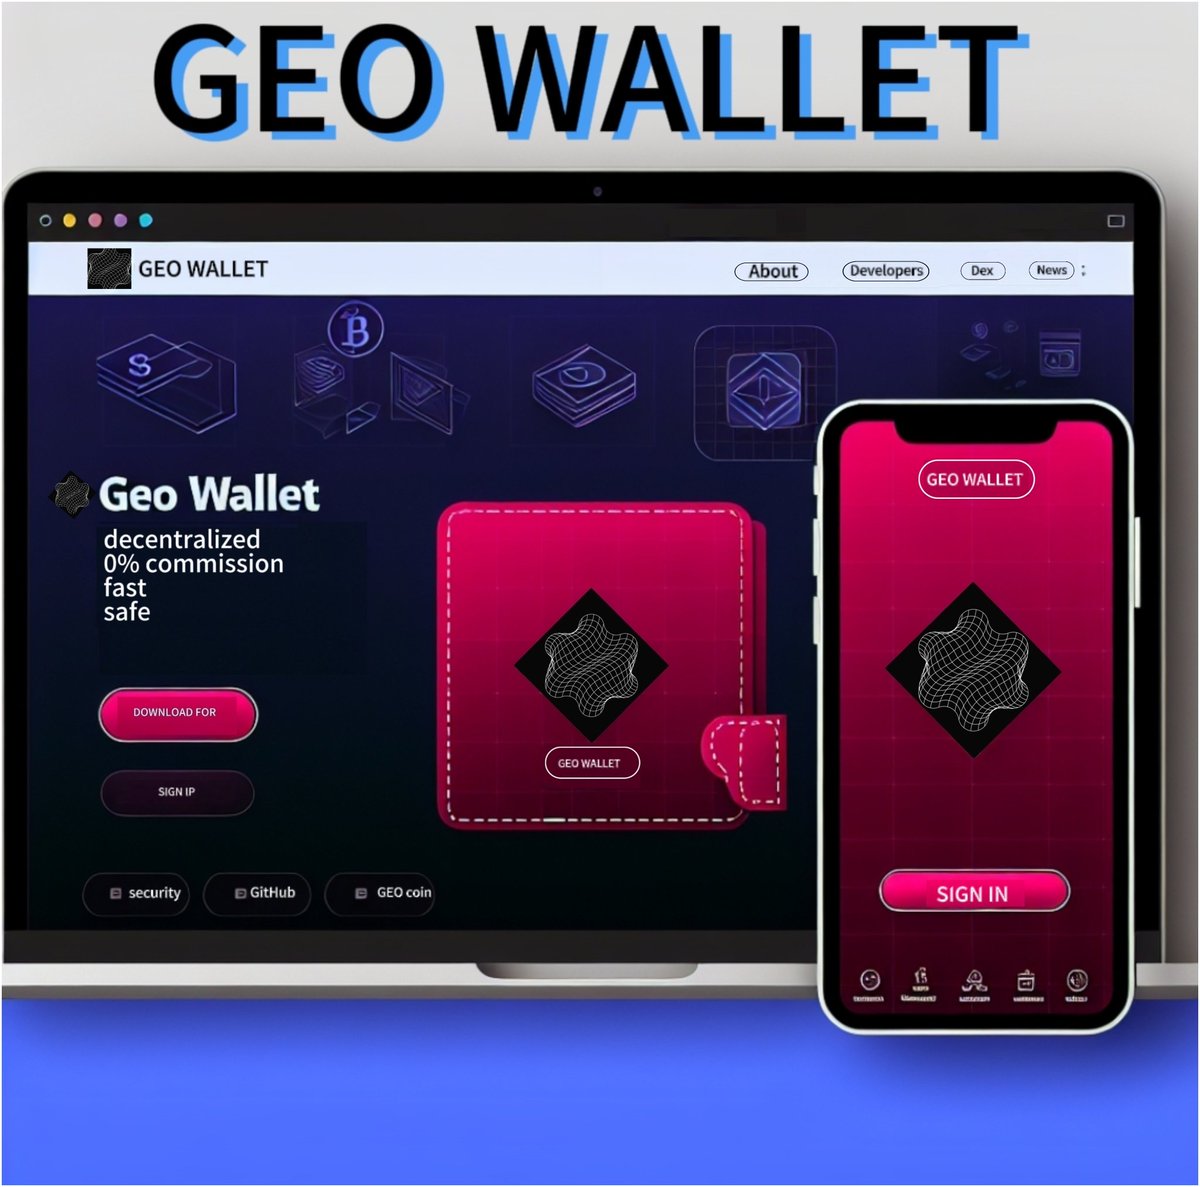 📢GEO WALLET💰 is the next product of the GEONETWORK🌍 ecosystem. ✅ 1. completely decentralized ✅ 2. commission 0% ✅3. fast ✅4. safe